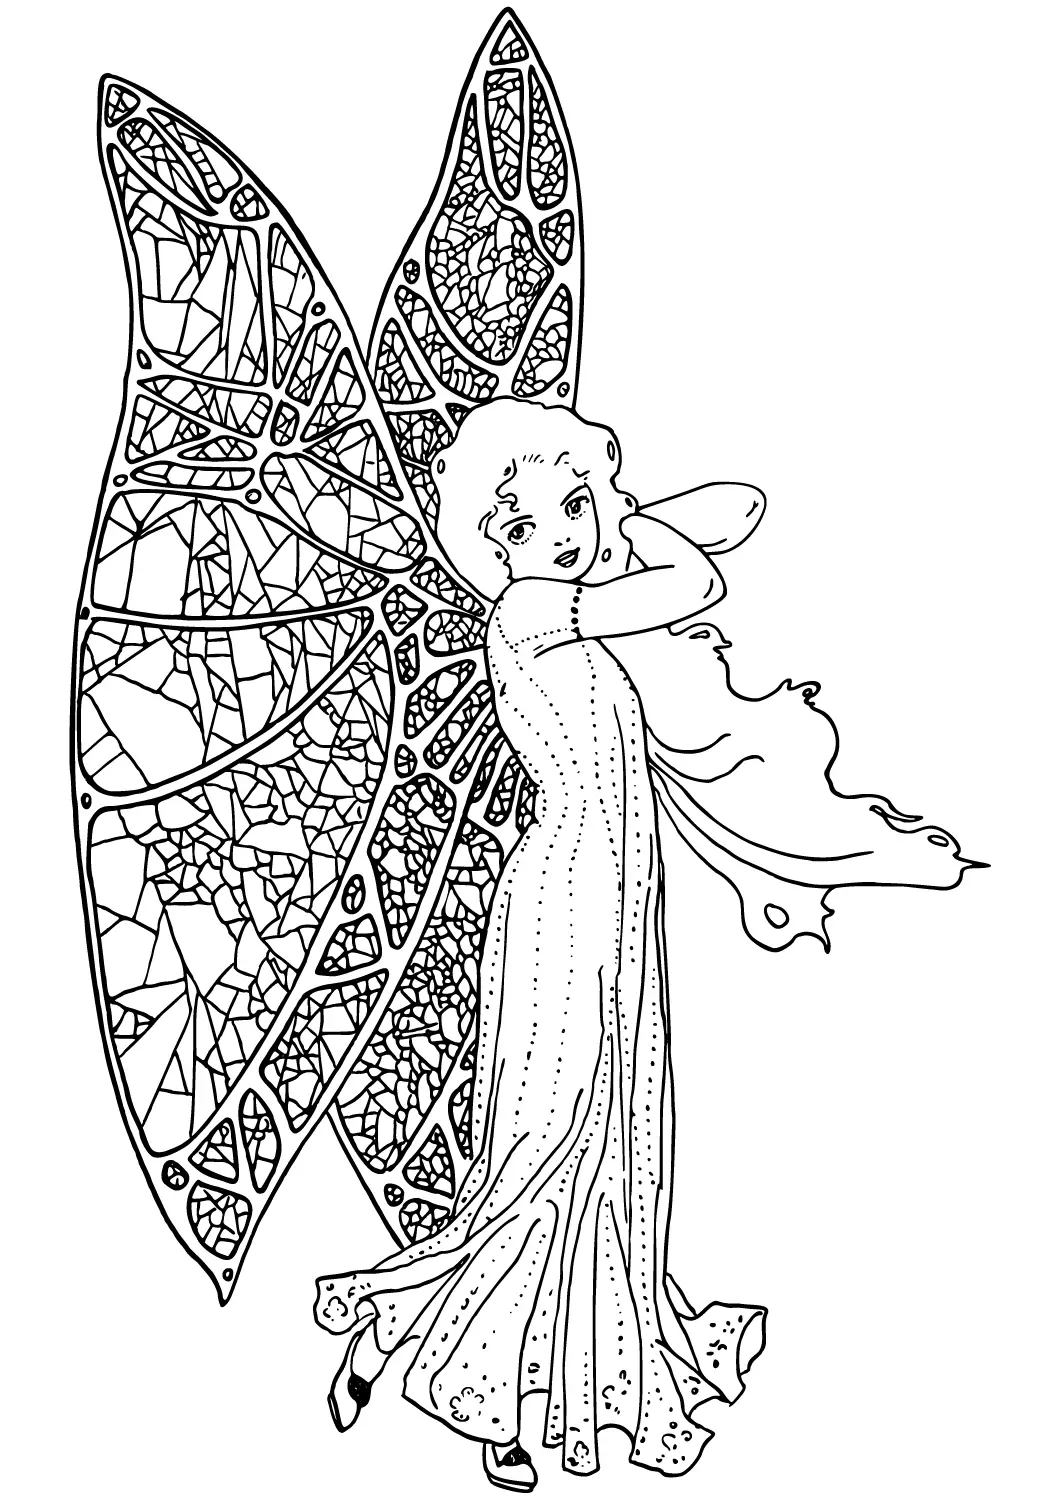 VINTAGE FAIRY BEAUTY Line Art Drawing Set Free Activity Coloring Pages for Kids-02